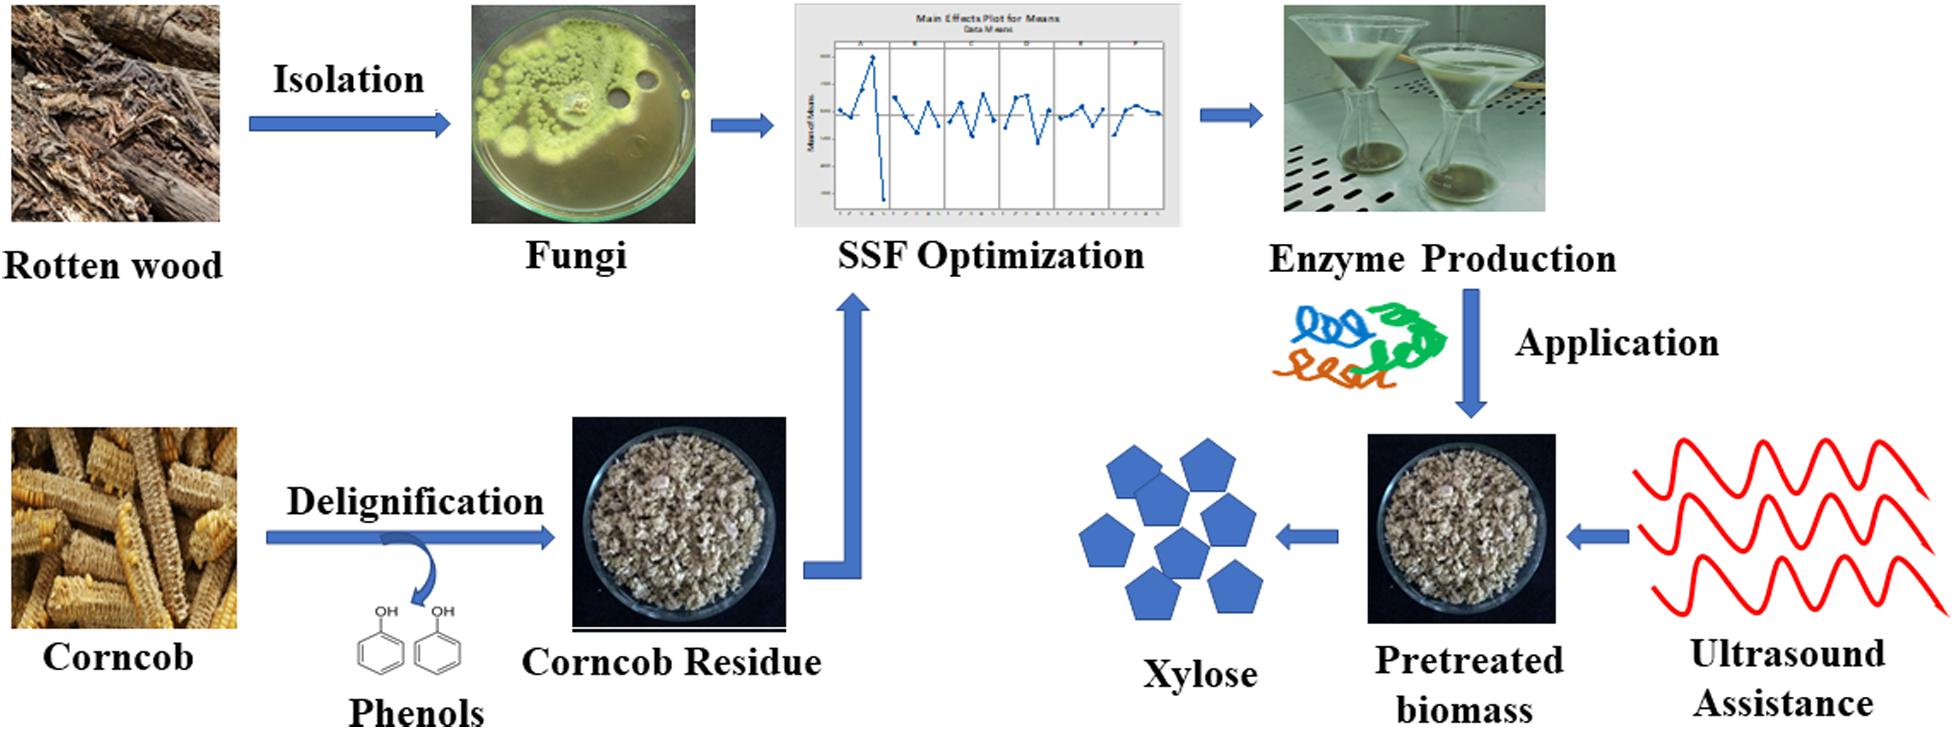 Frontiers Optimized Production Of Xylanase By Penicillium Purpurogenum And Ultrasound Impact